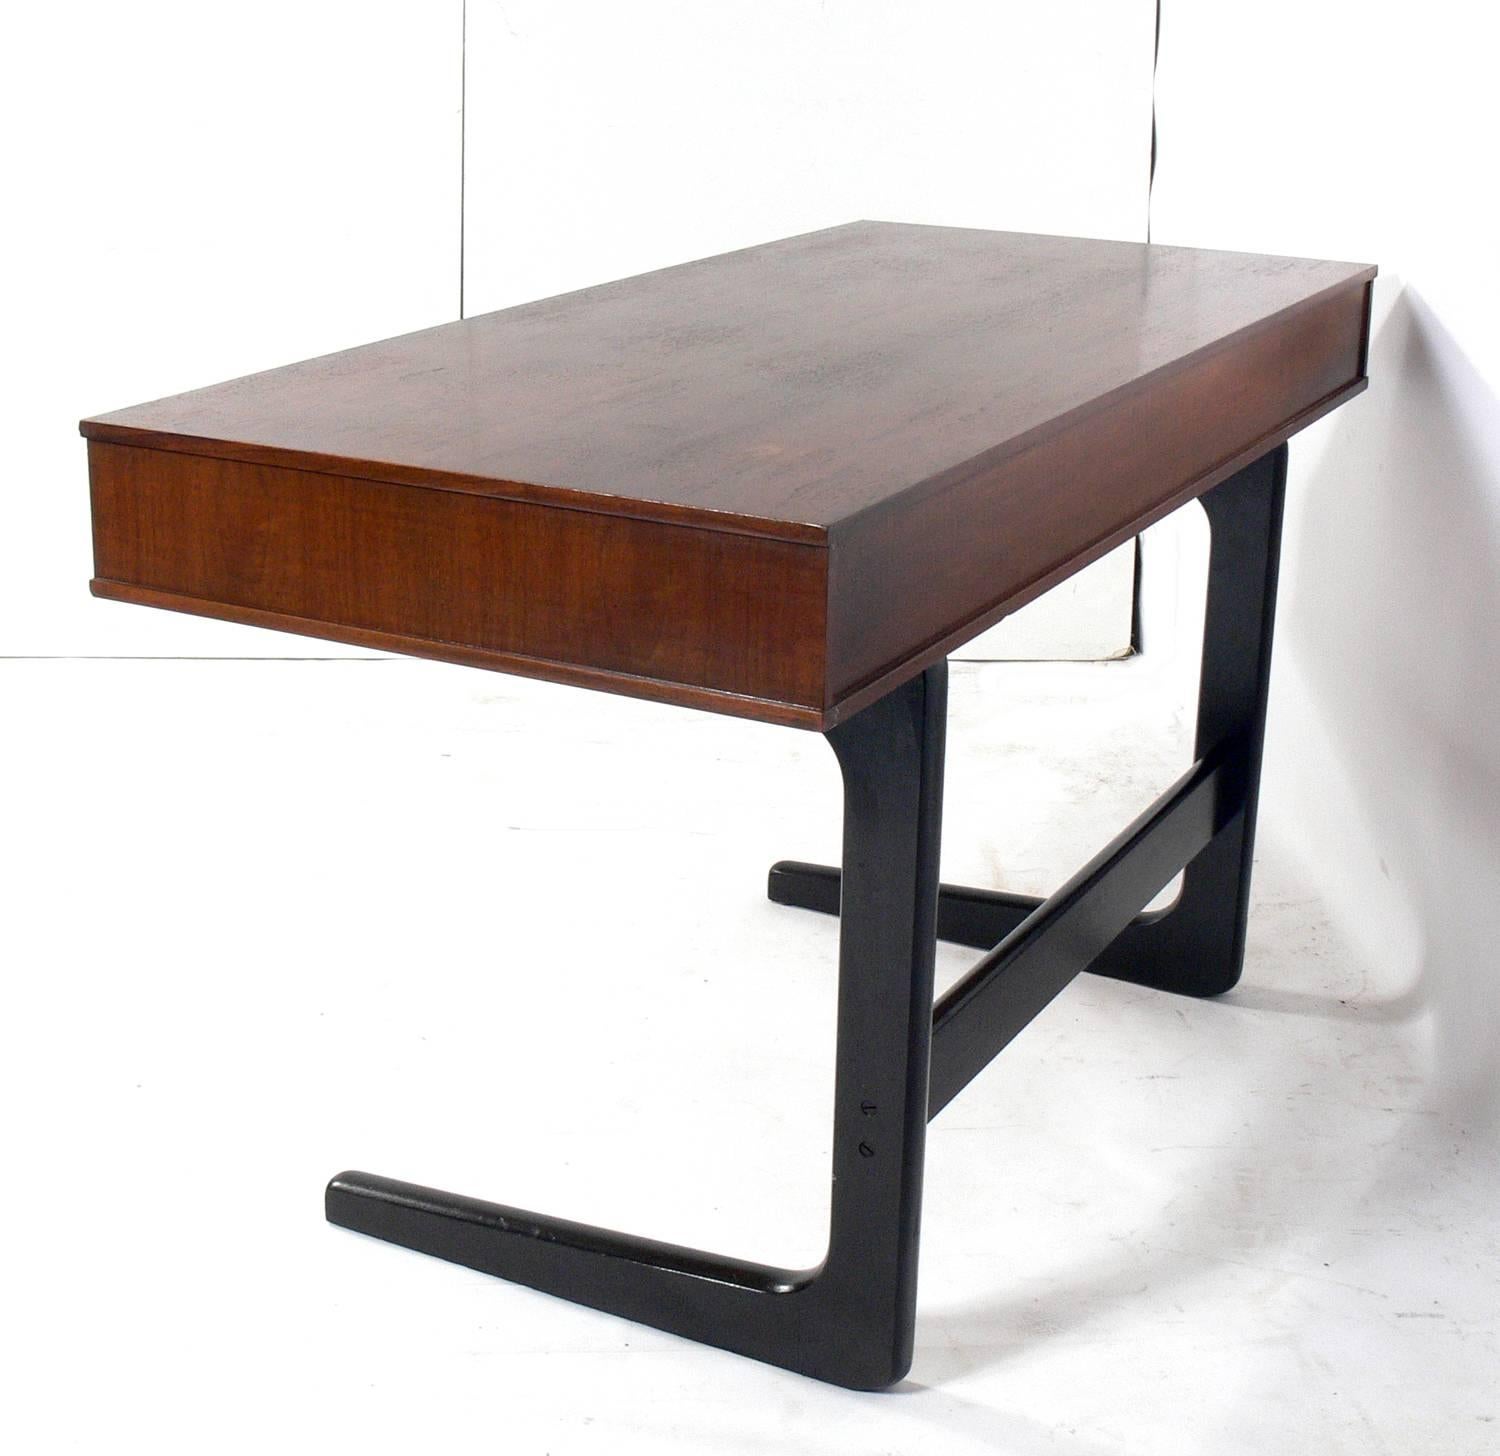 Lacquered Clean Lined Midcentury Desk with Leather Pulls